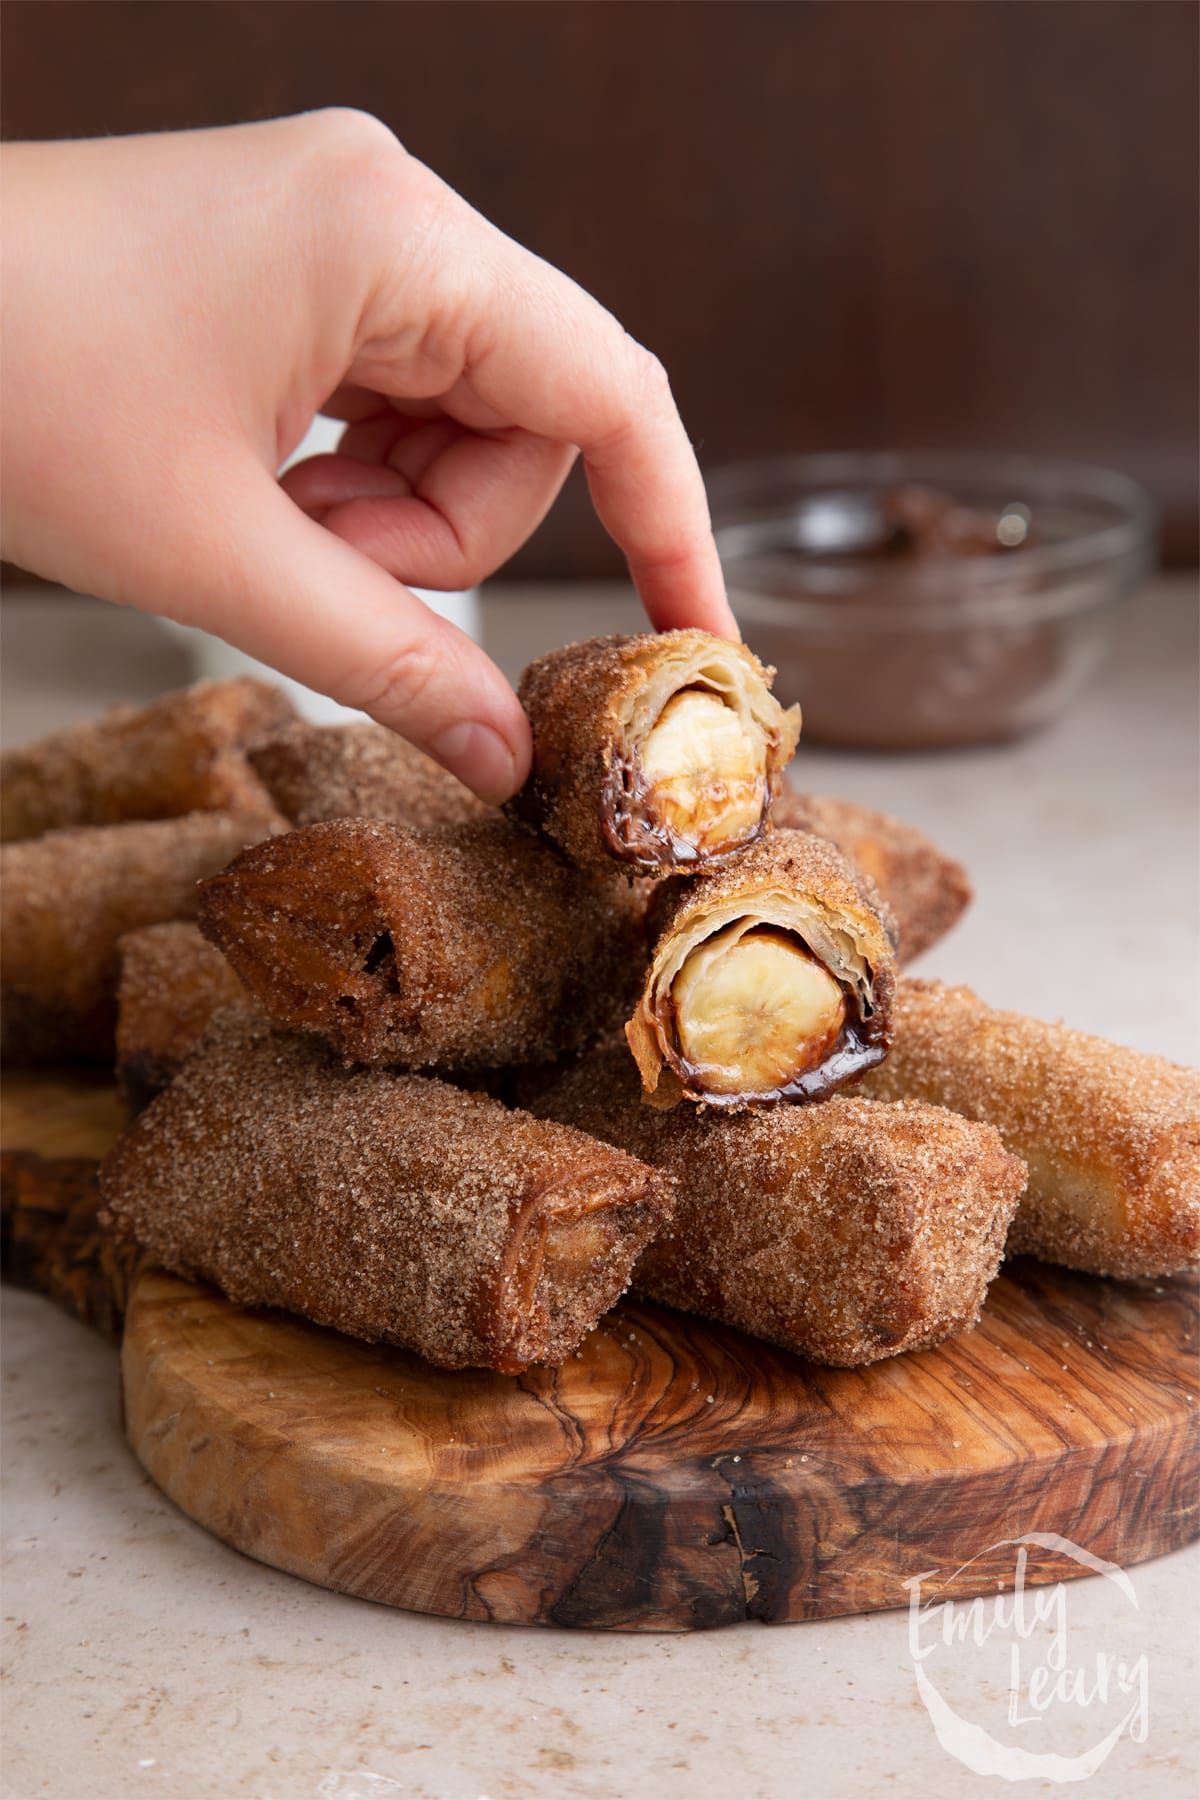 Side on shot of the finished banana chocolate spring rolls on a wooden board with the top roll cut open.